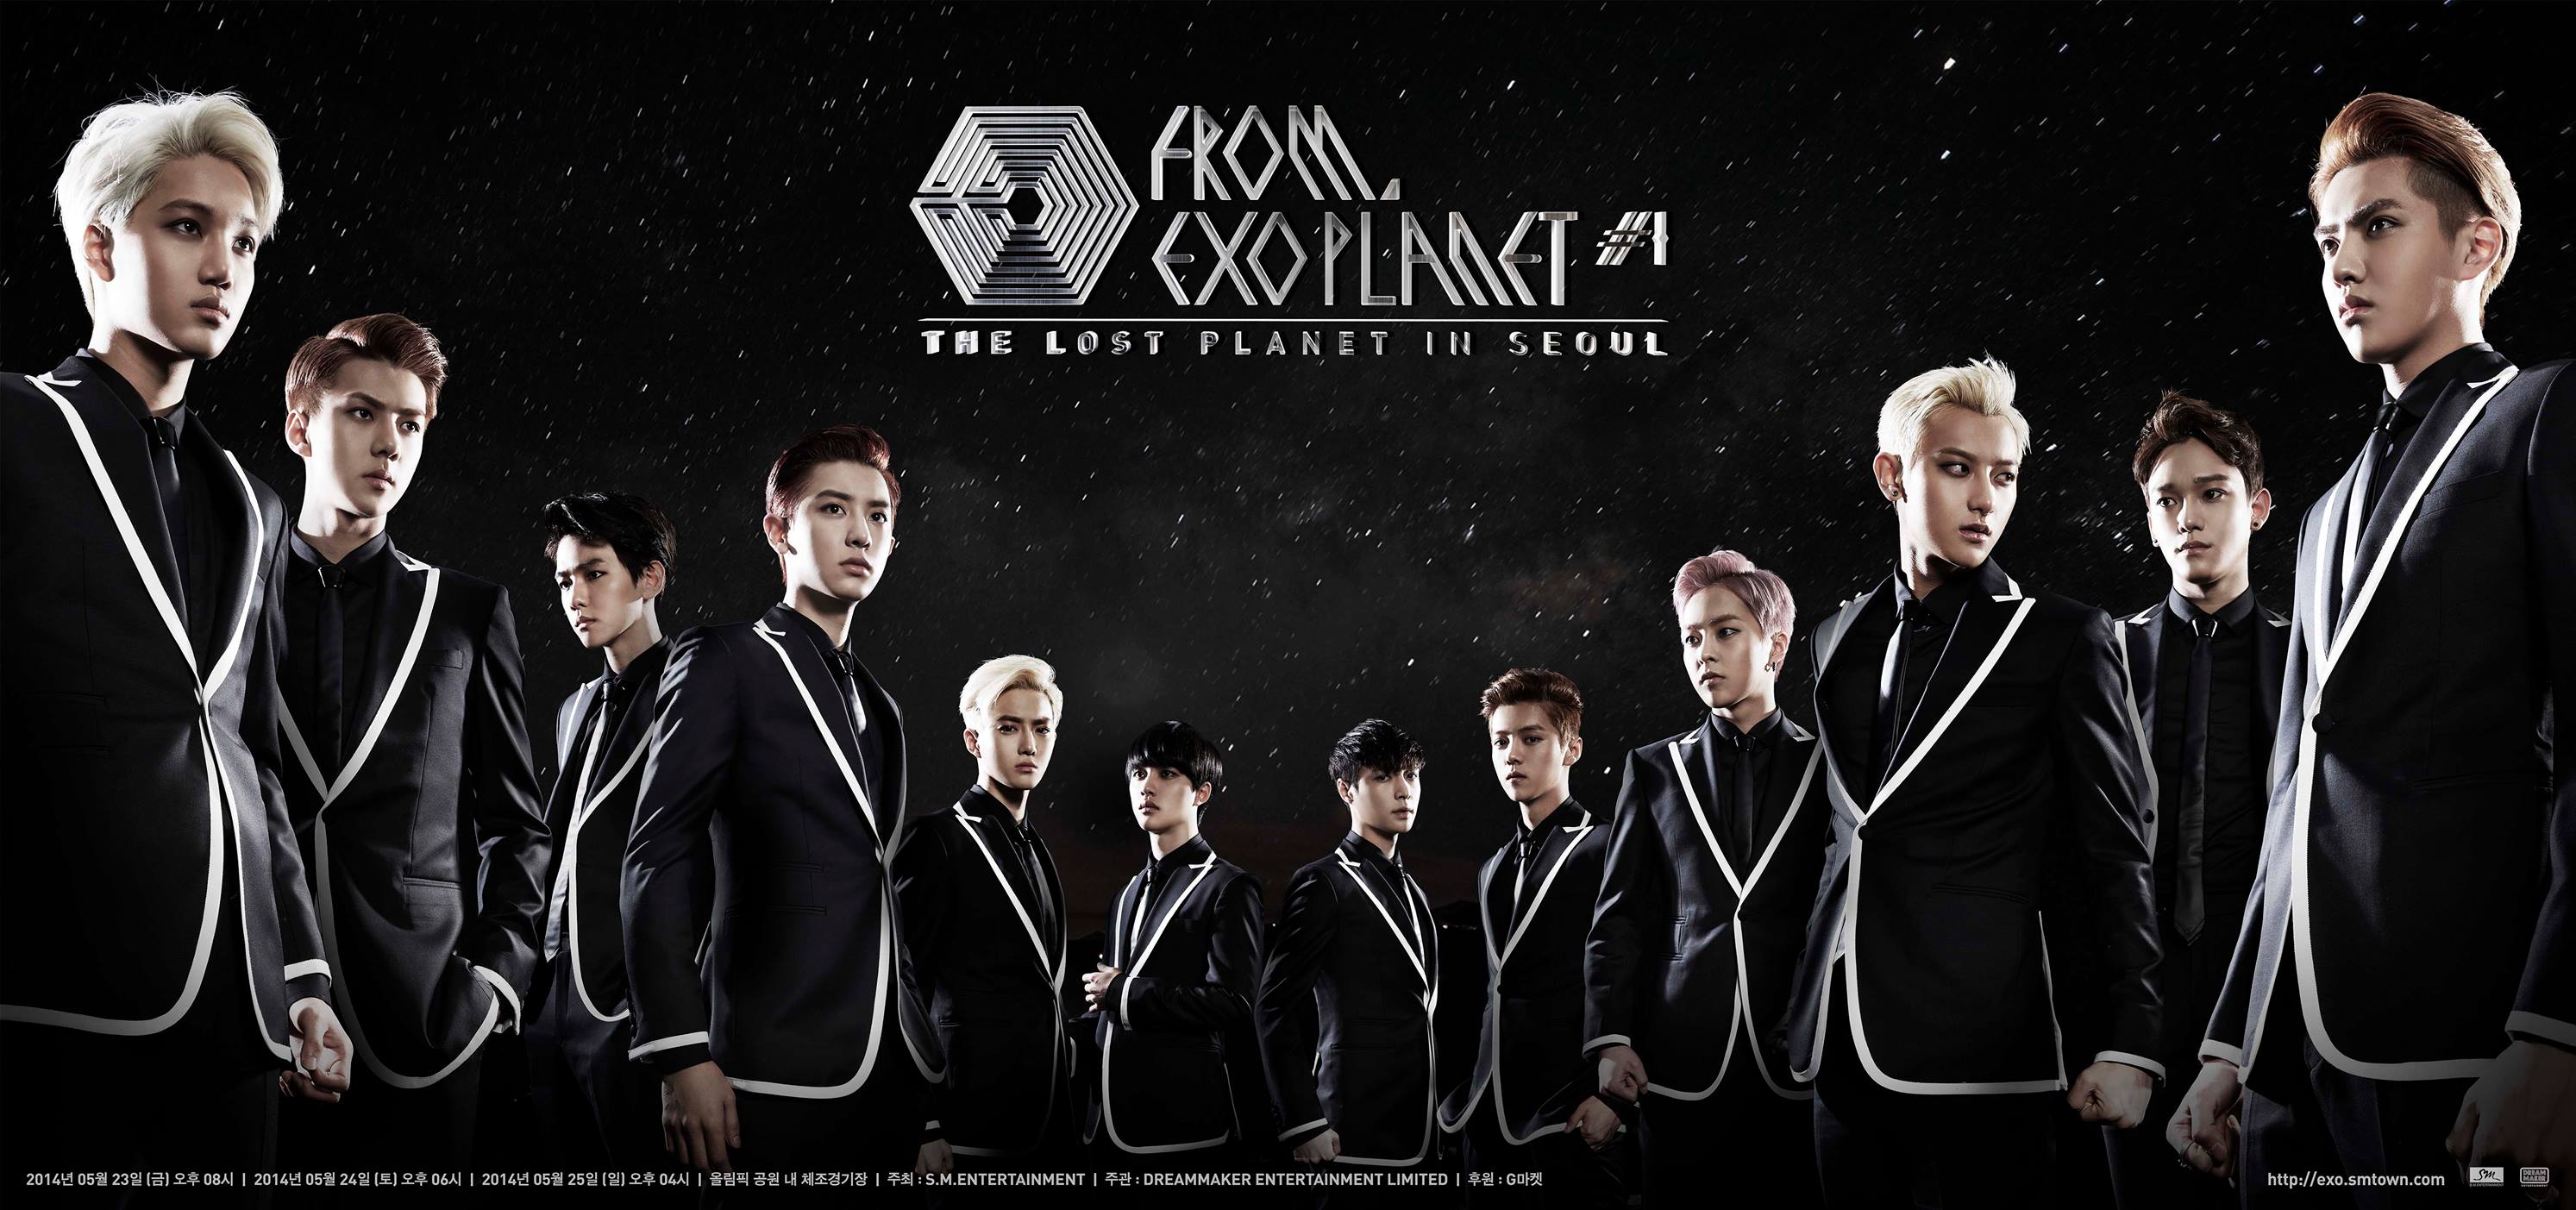 EXO FROM. EXOPLANET 1 - THE LOST PLANET | SMTown Wiki | Fandom